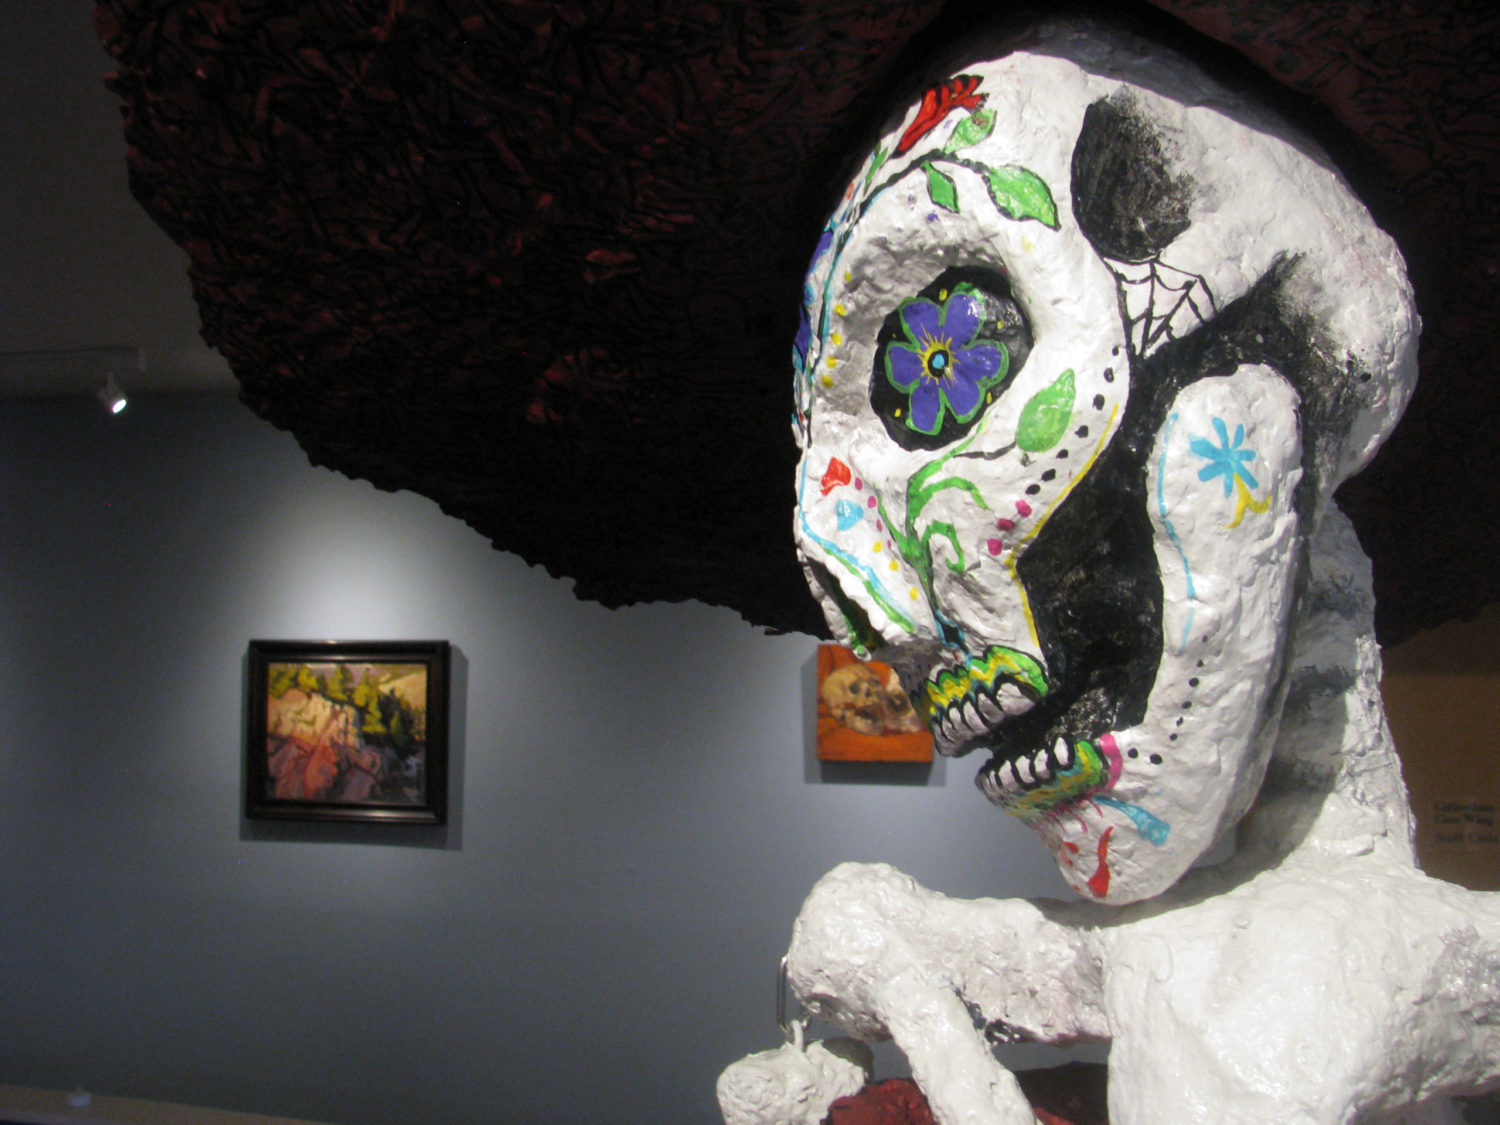 An image of a paper mache skull with Day of the Dead artwork painted on, from the Silver City Museum's curated show called "Arte Chicano"